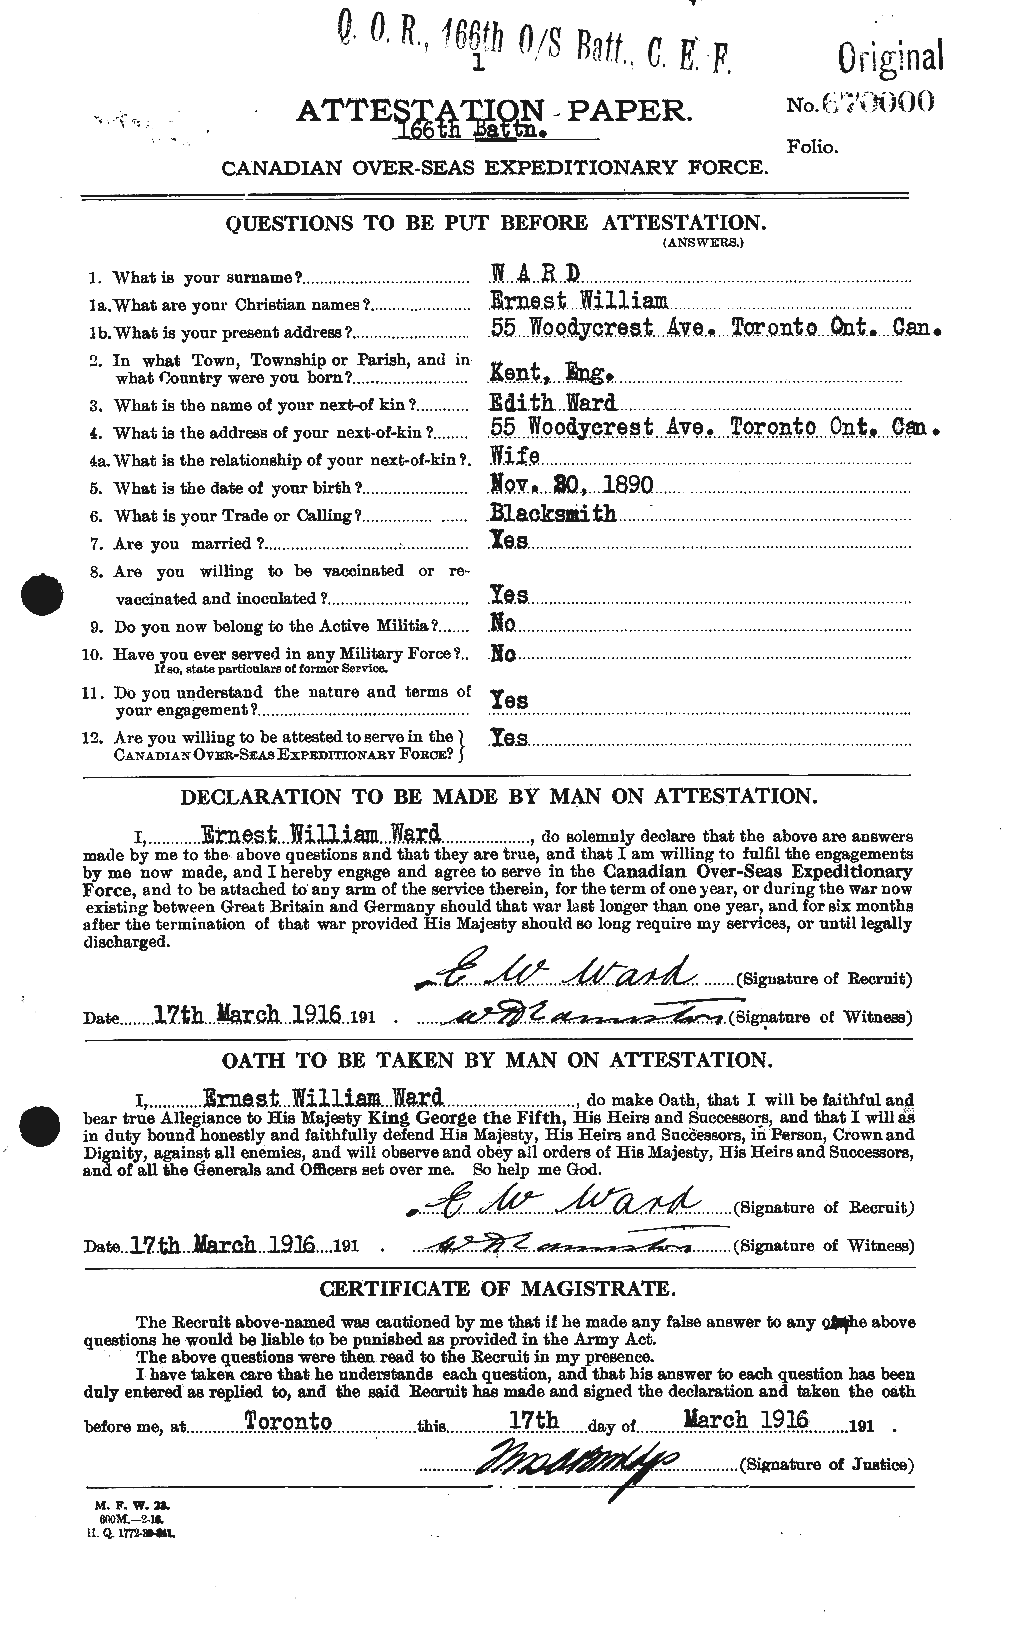 Personnel Records of the First World War - CEF 657674a